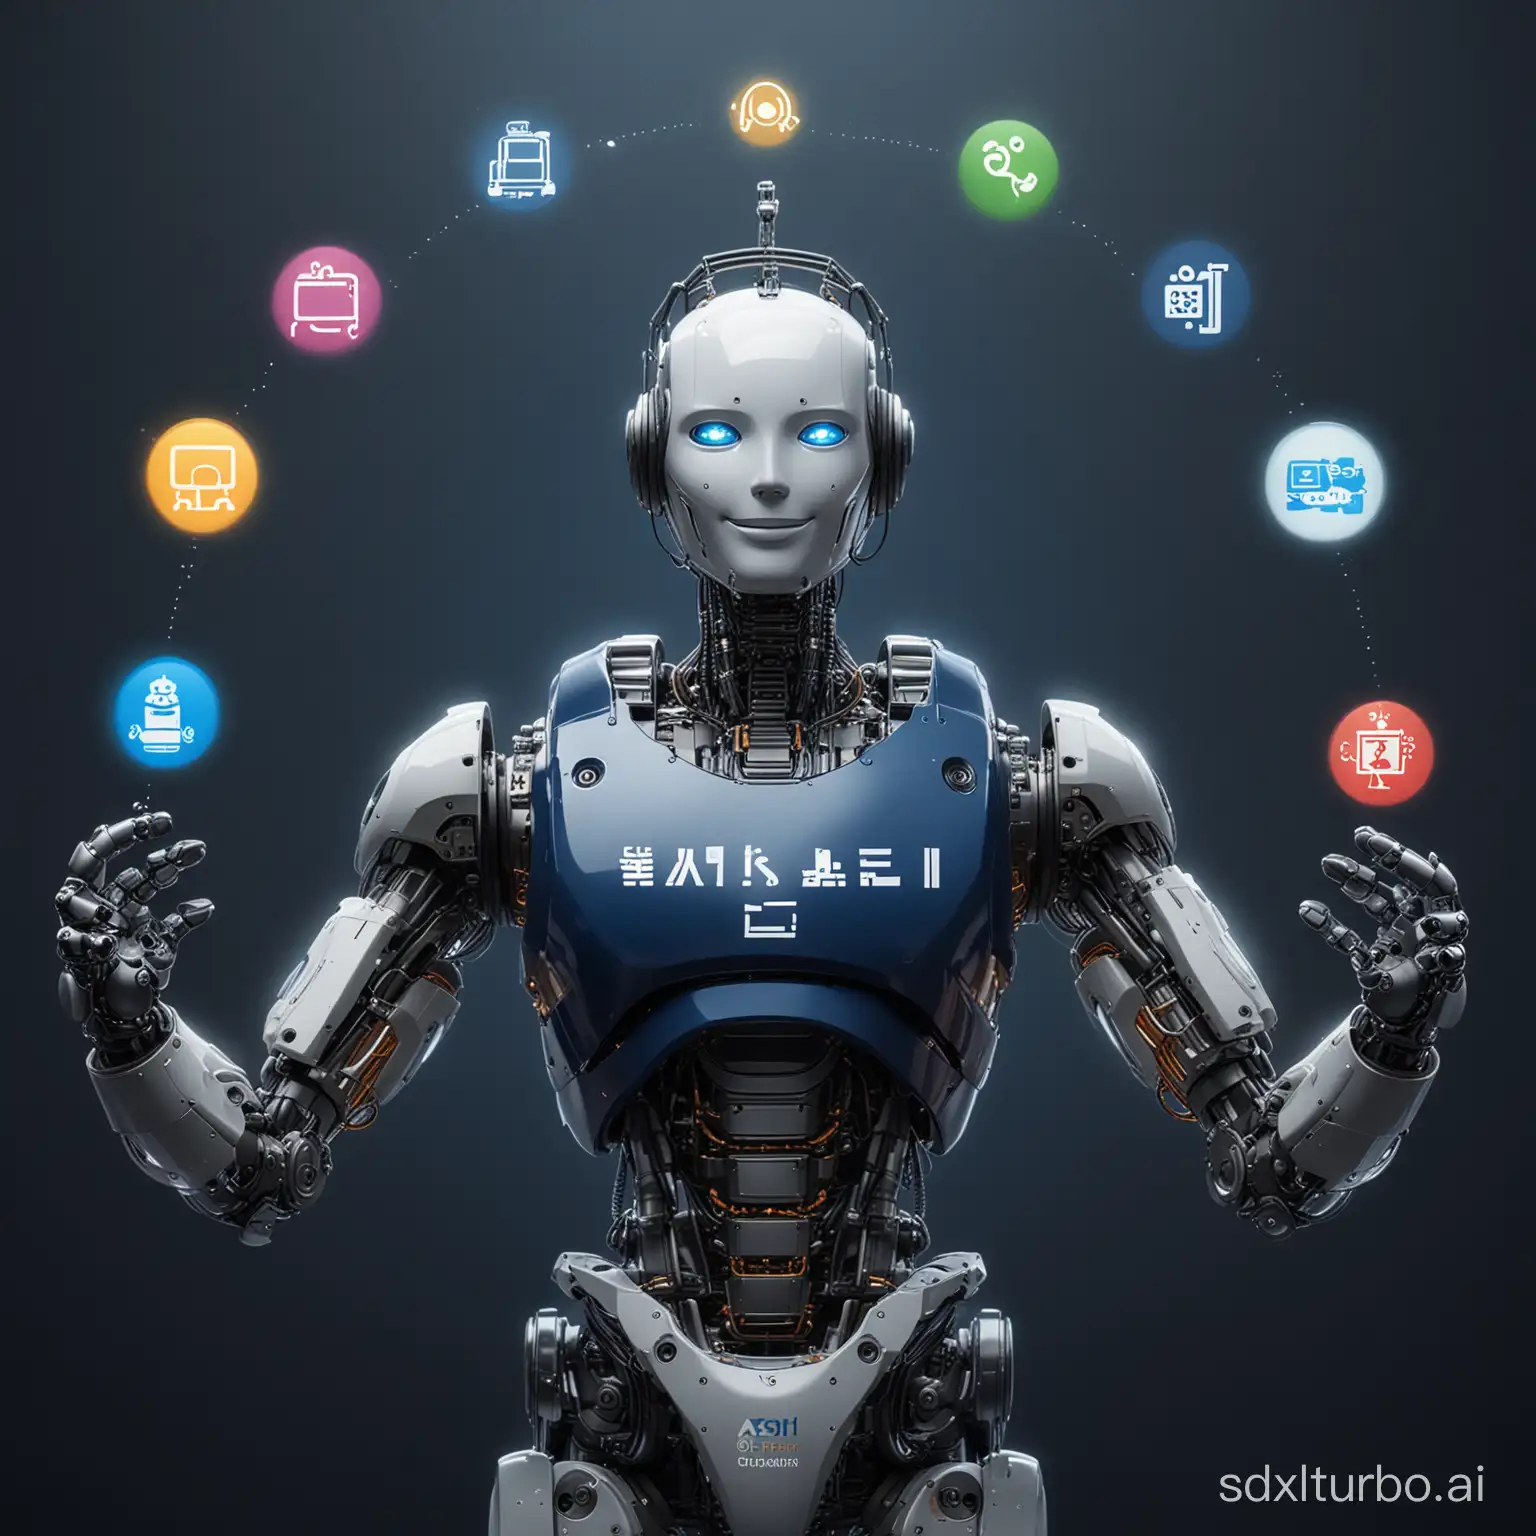 Friendly-AI-Robot-Offering-Assistance-with-Halo-Ring-and-Leading-Language-Models-Logos